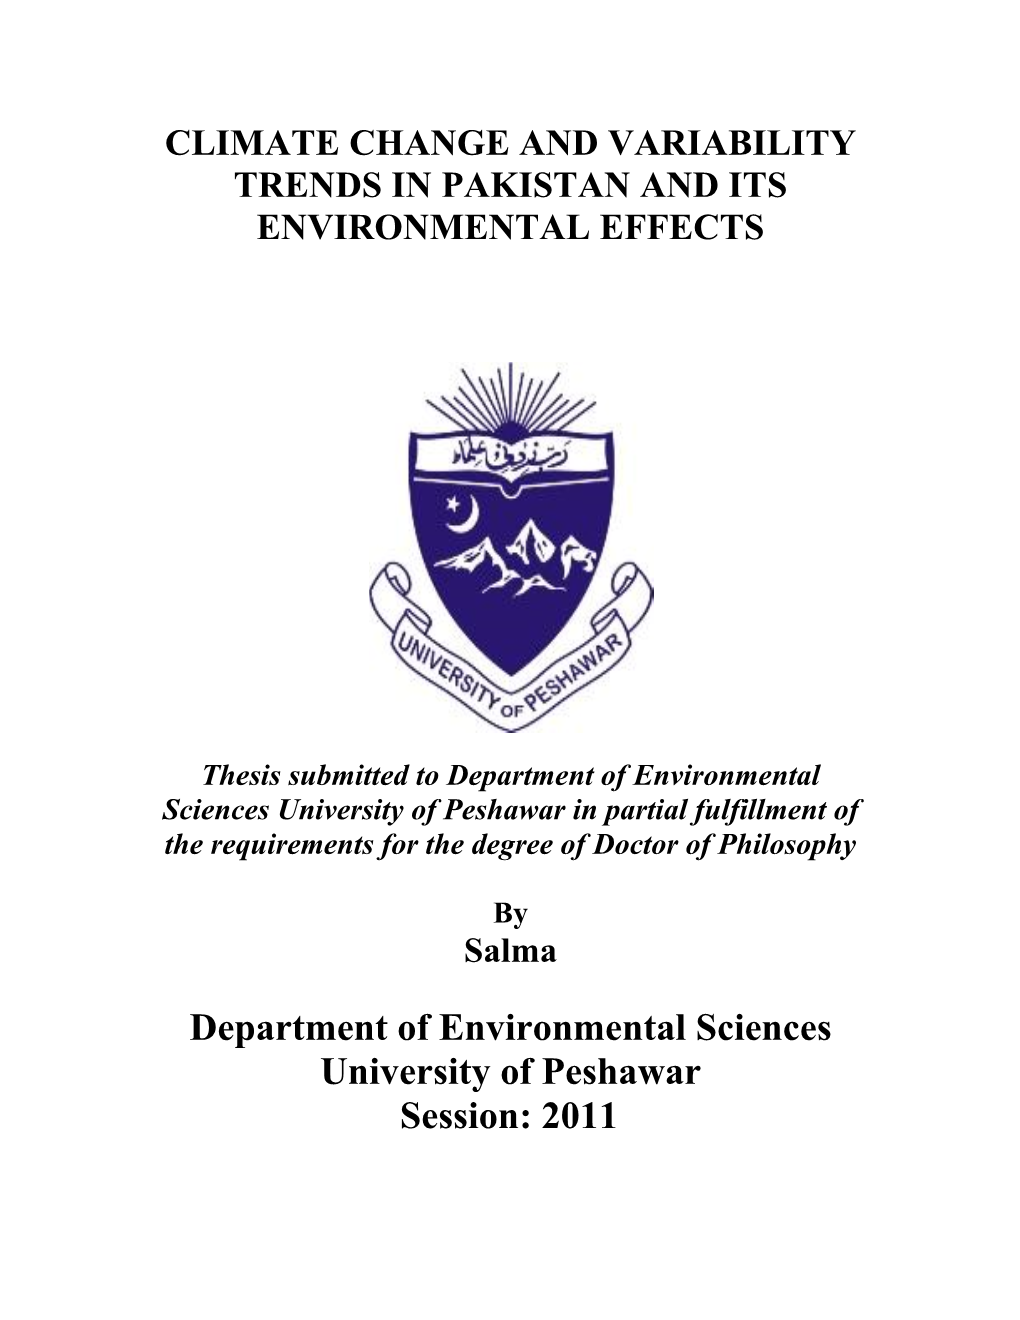 Climate Change and Variability Trends in Pakistan and Its Environmental Effects